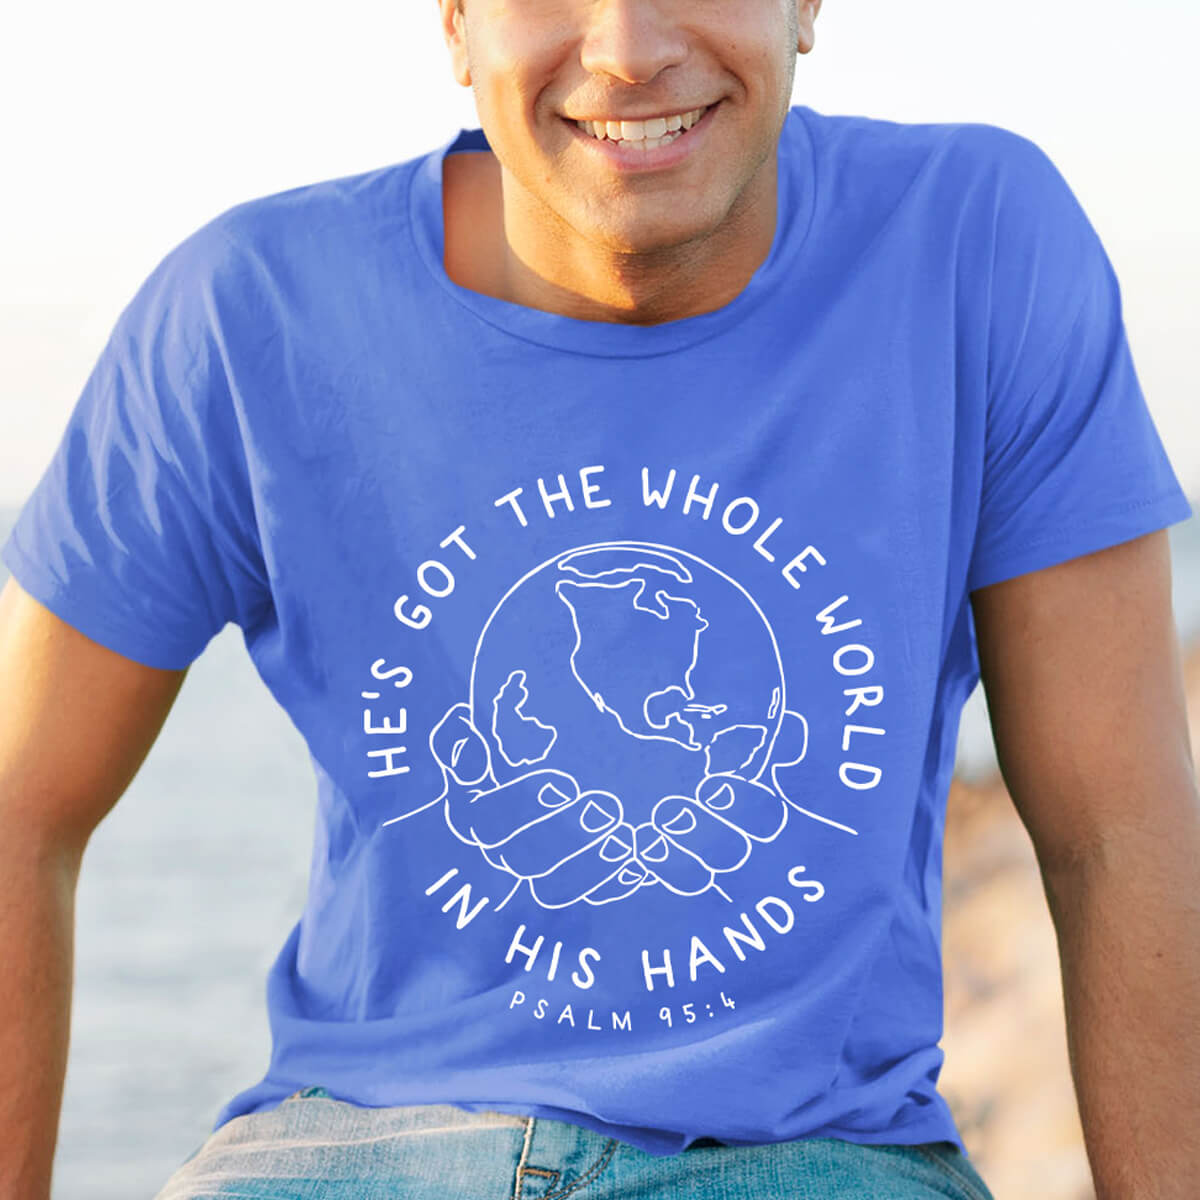 He's Got The Whole World In His Hands Men's T-Shirt